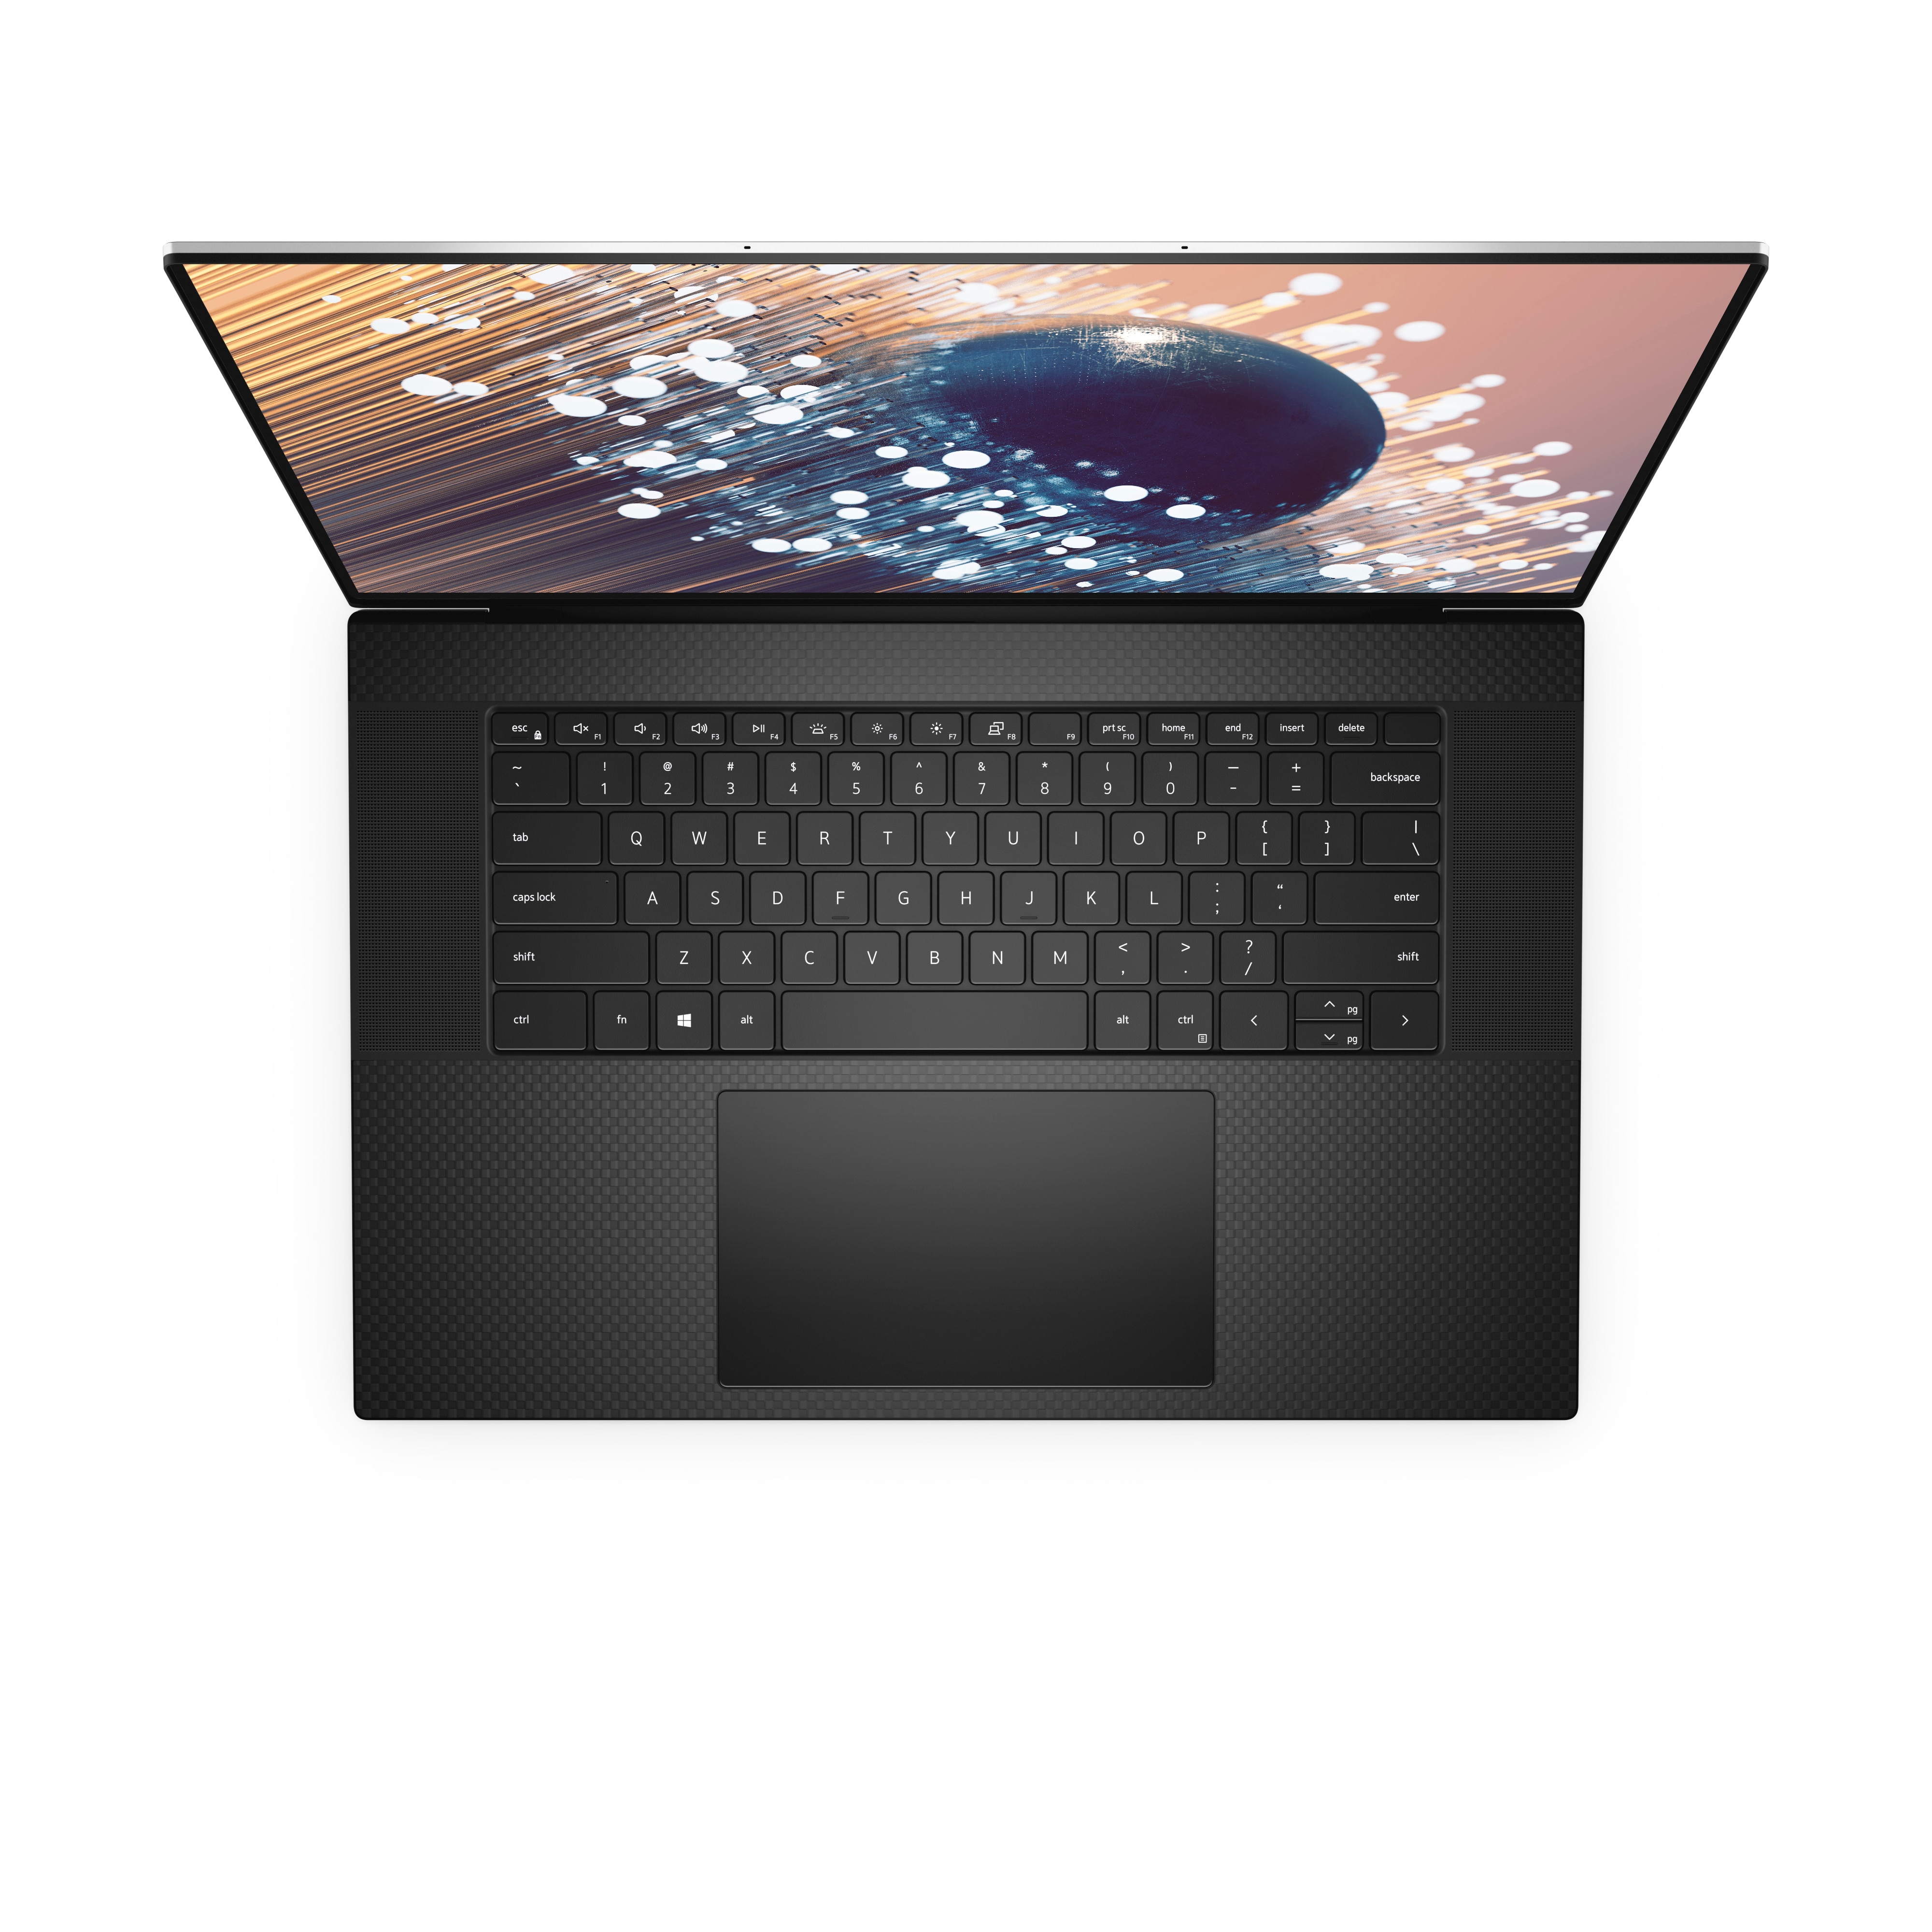 Dell XPS 17 Laptop | Dell USA